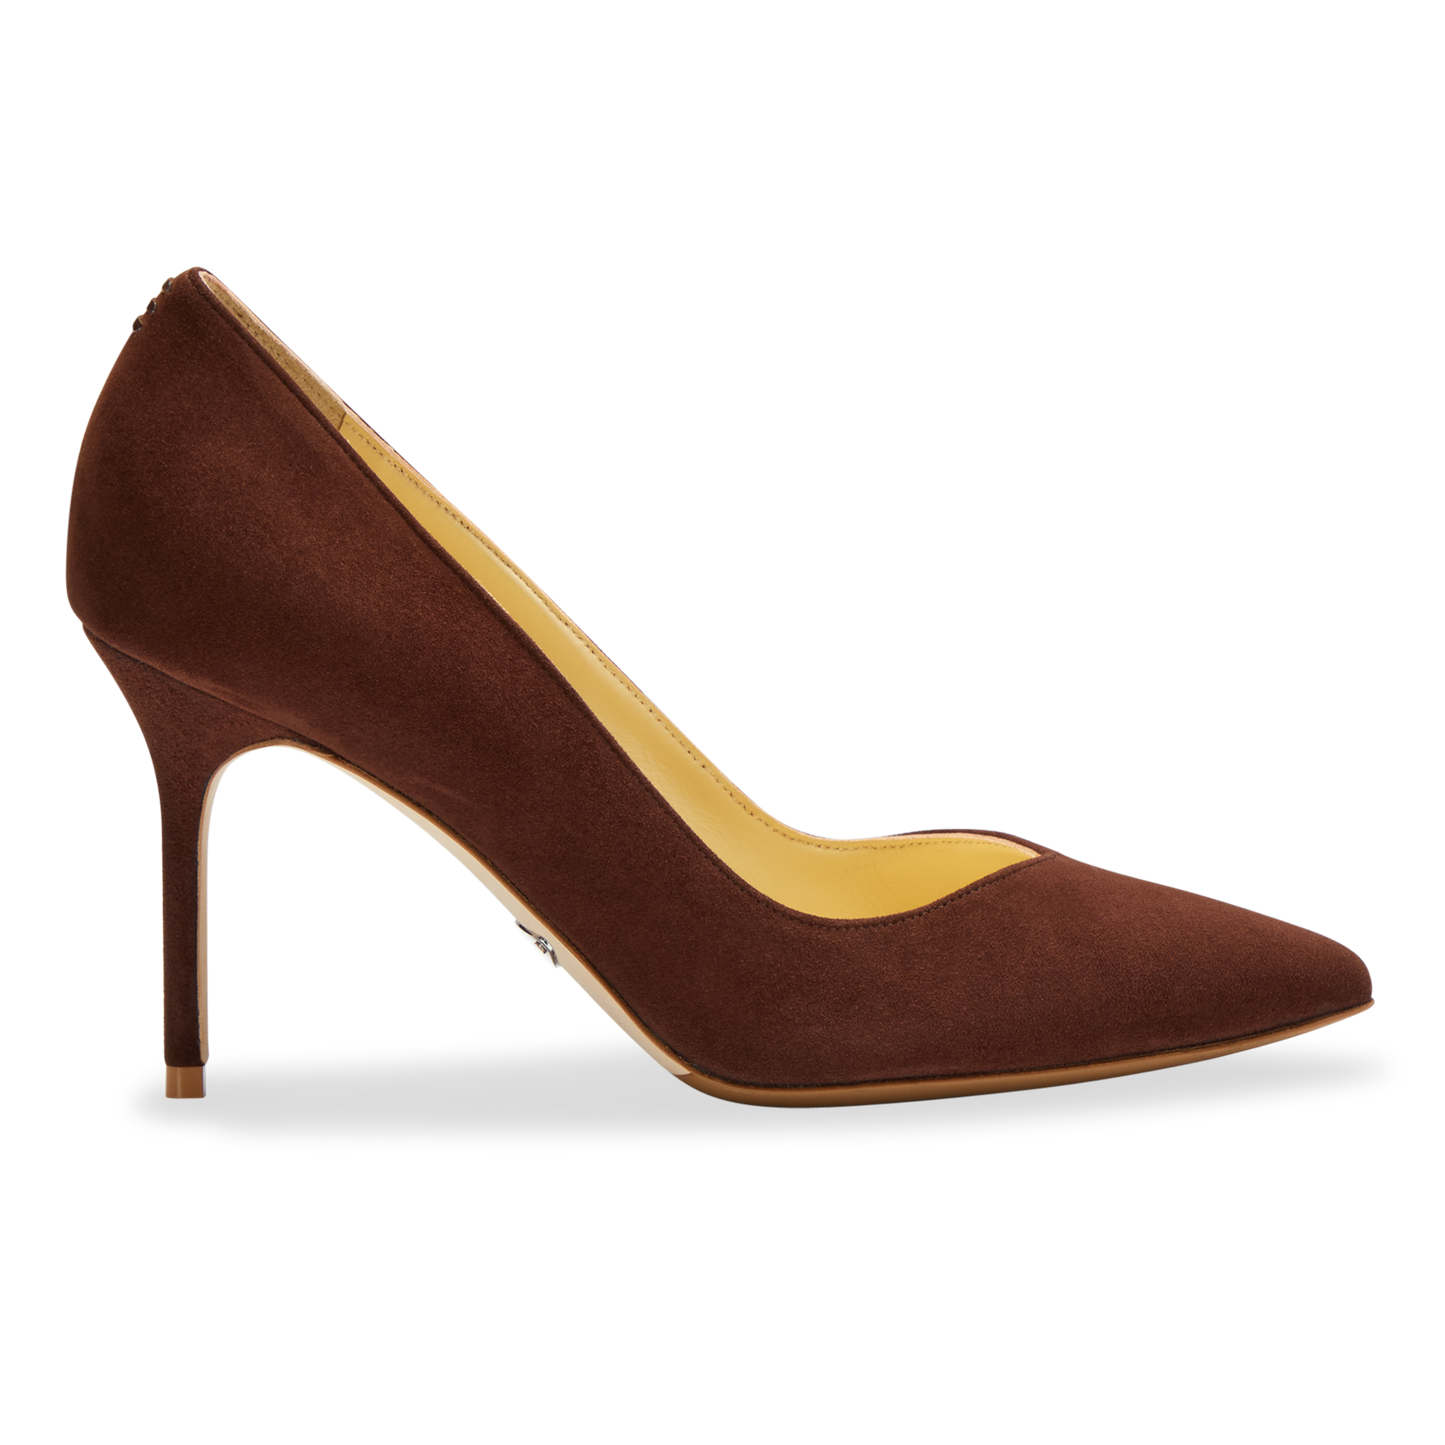 85mm Italian Made Pointed Toe Pump in Espresso Suede